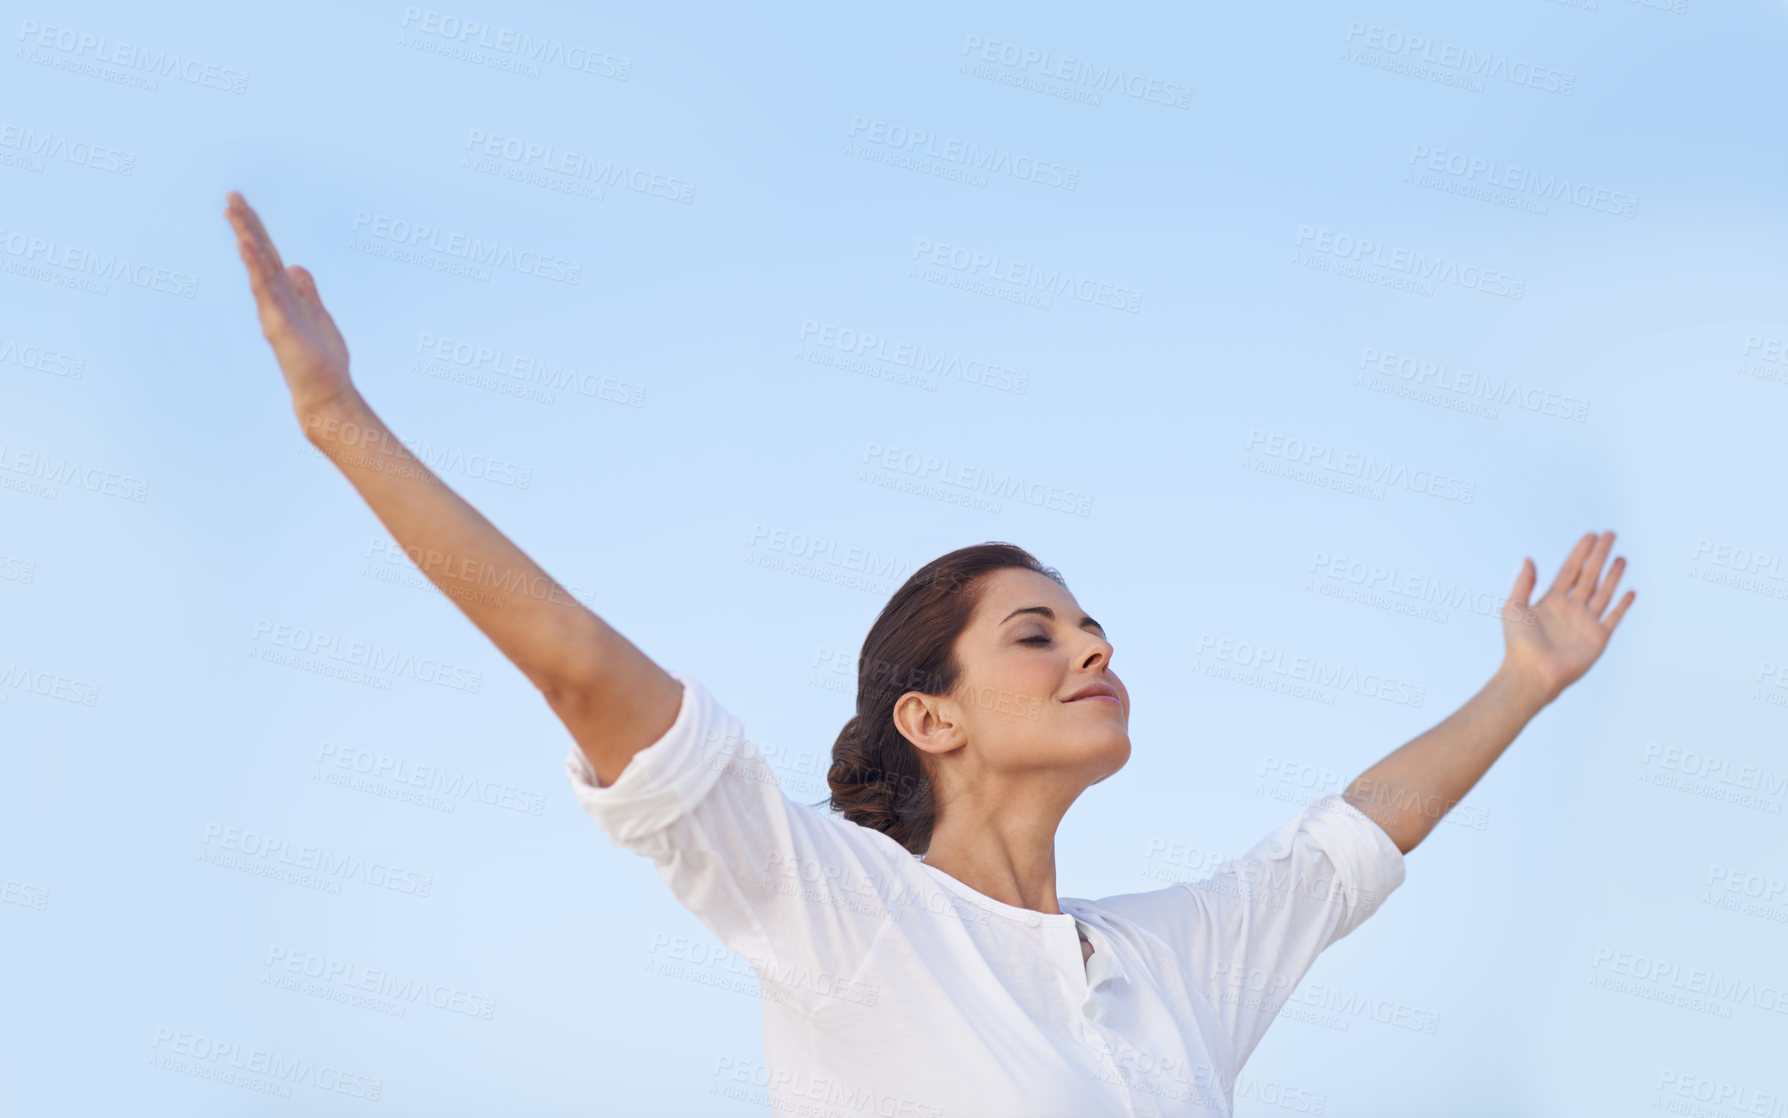 Buy stock photo A young woman standing with her arms outstretched